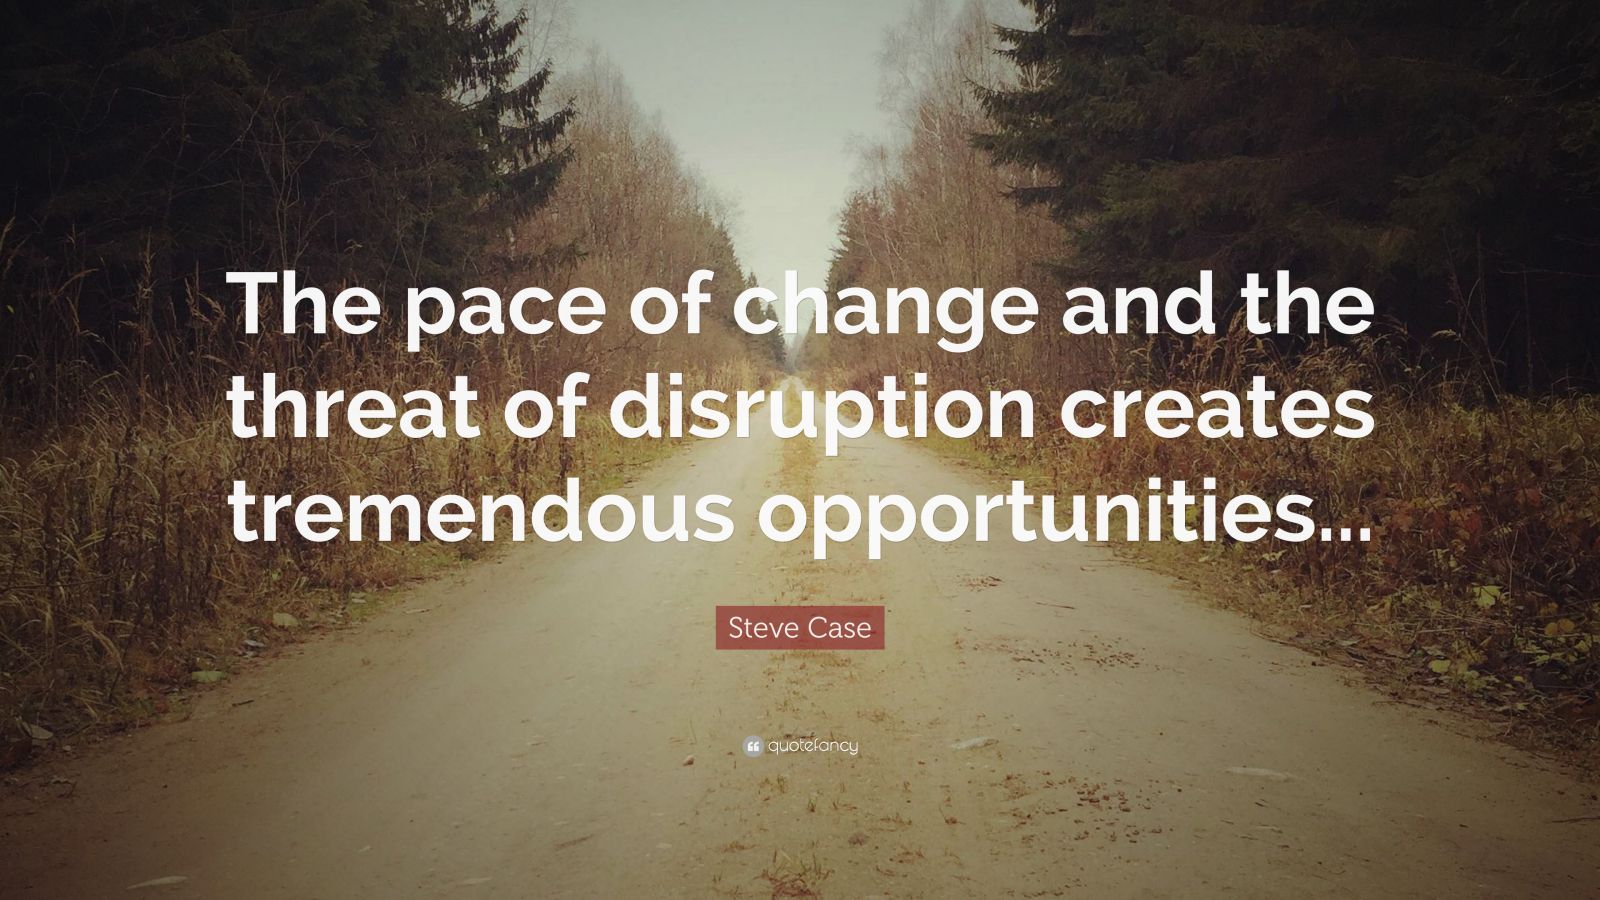 Steve Case Quote: “The pace of change and the threat of disruption ...